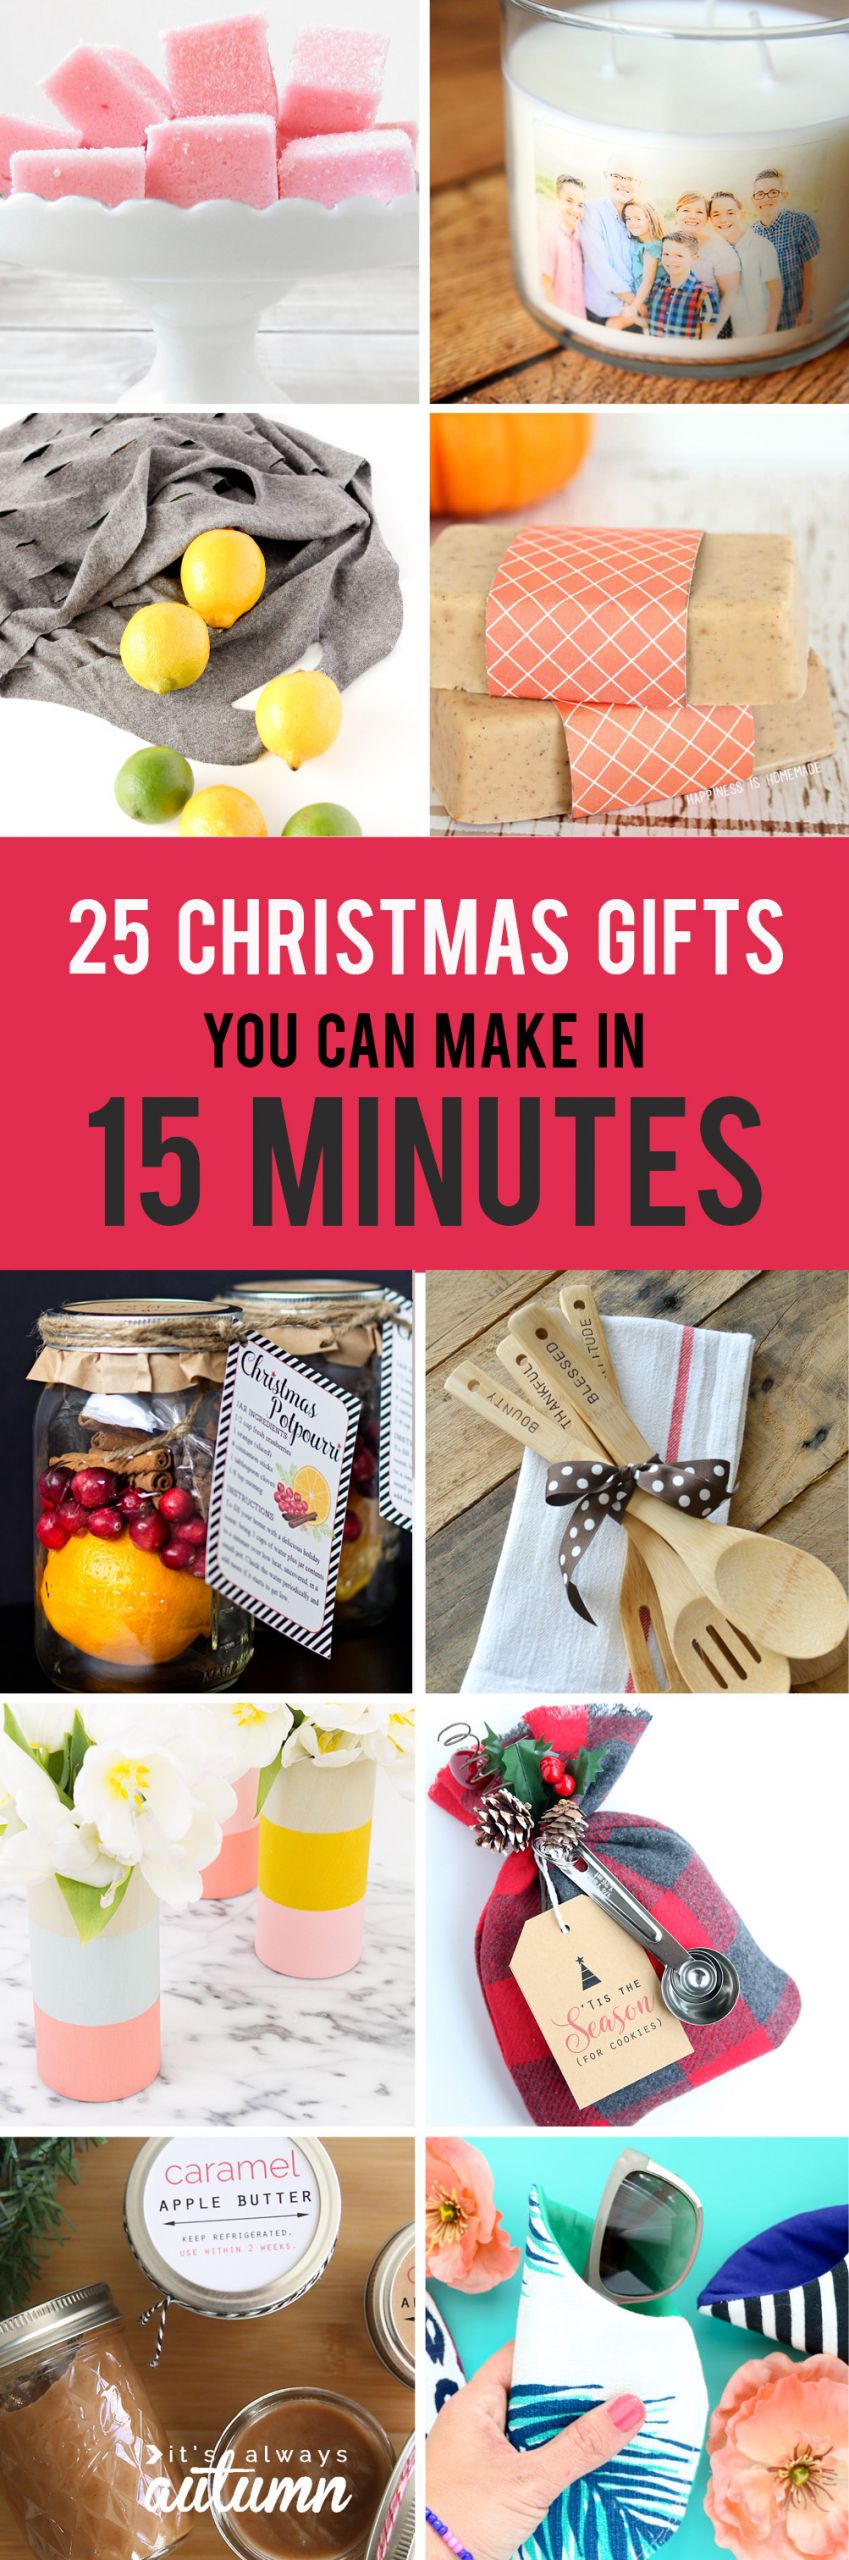 DIY Homemade Gifts
 25 easy homemade Christmas ts you can make in 15